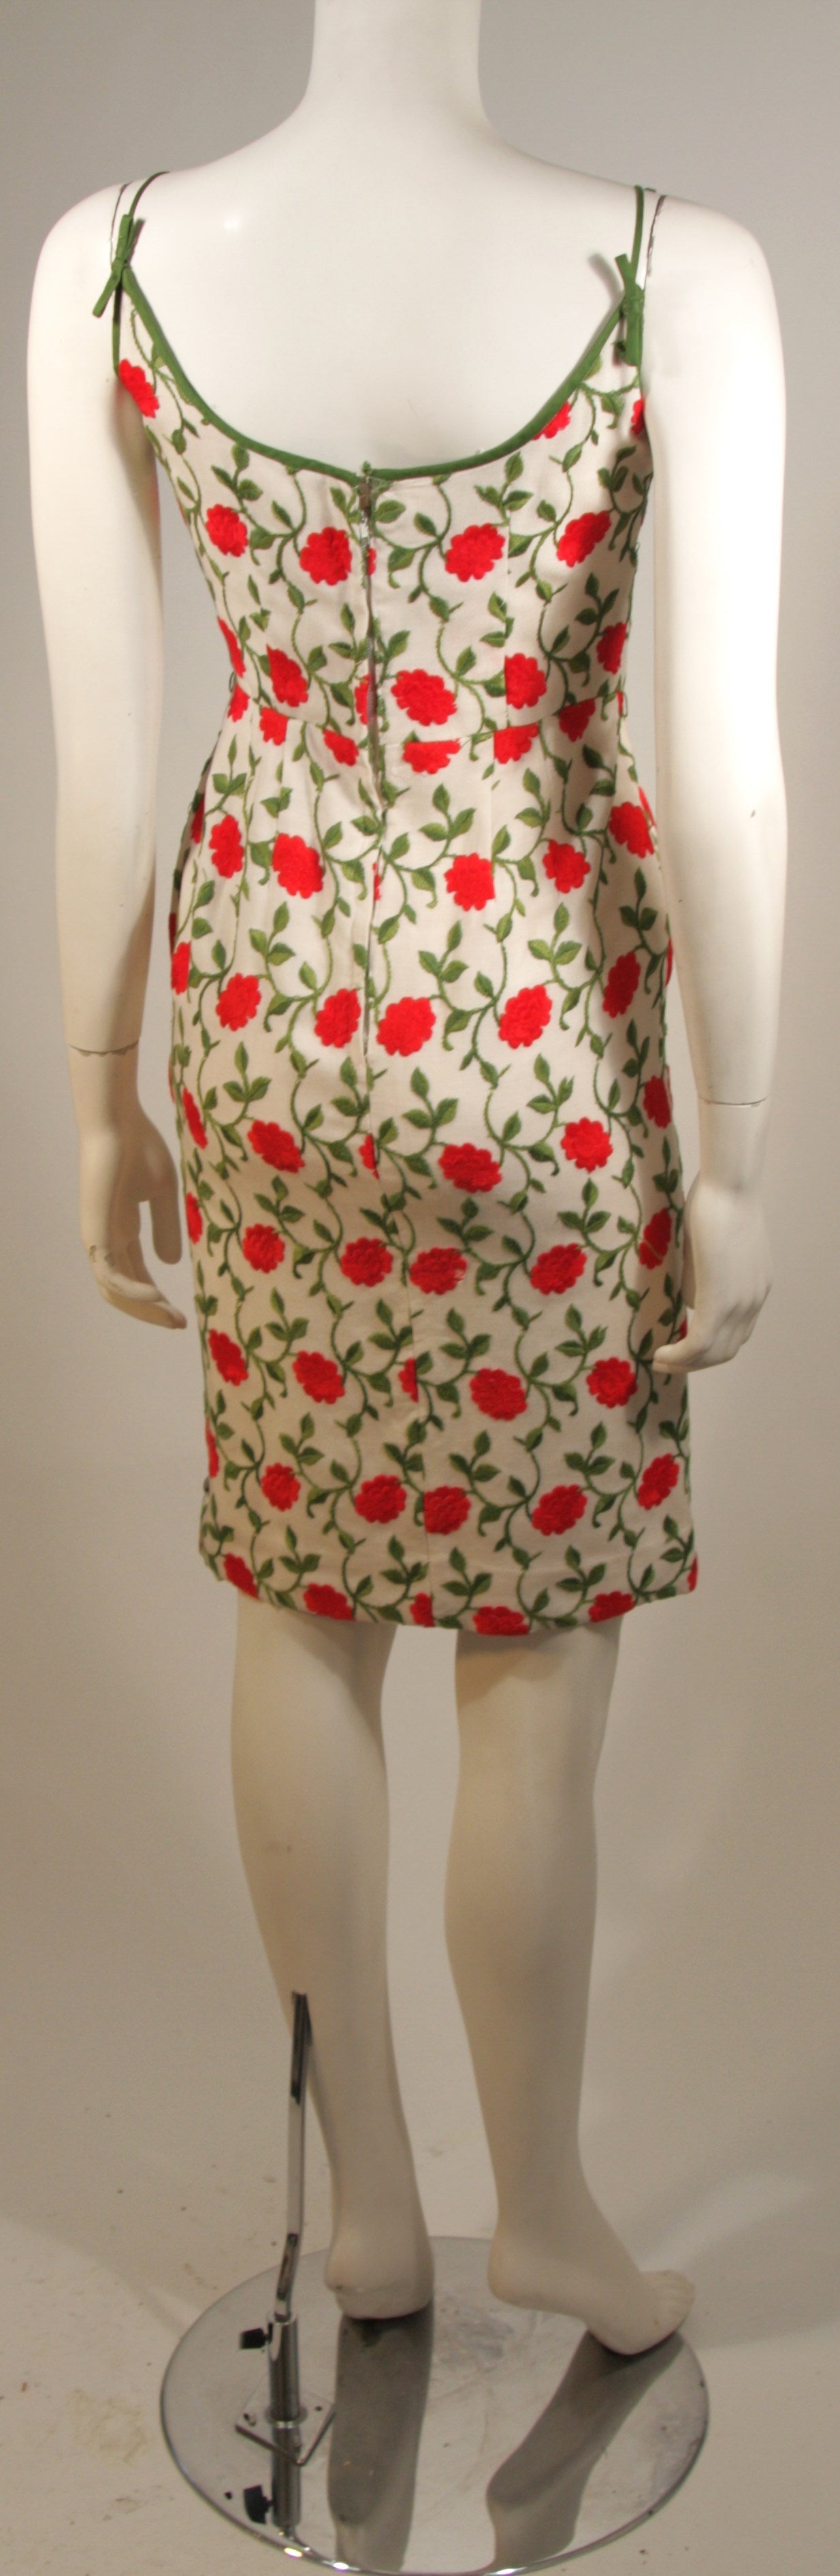 Women's or Men's Red Floral Embroidered Linen Dress For Sale